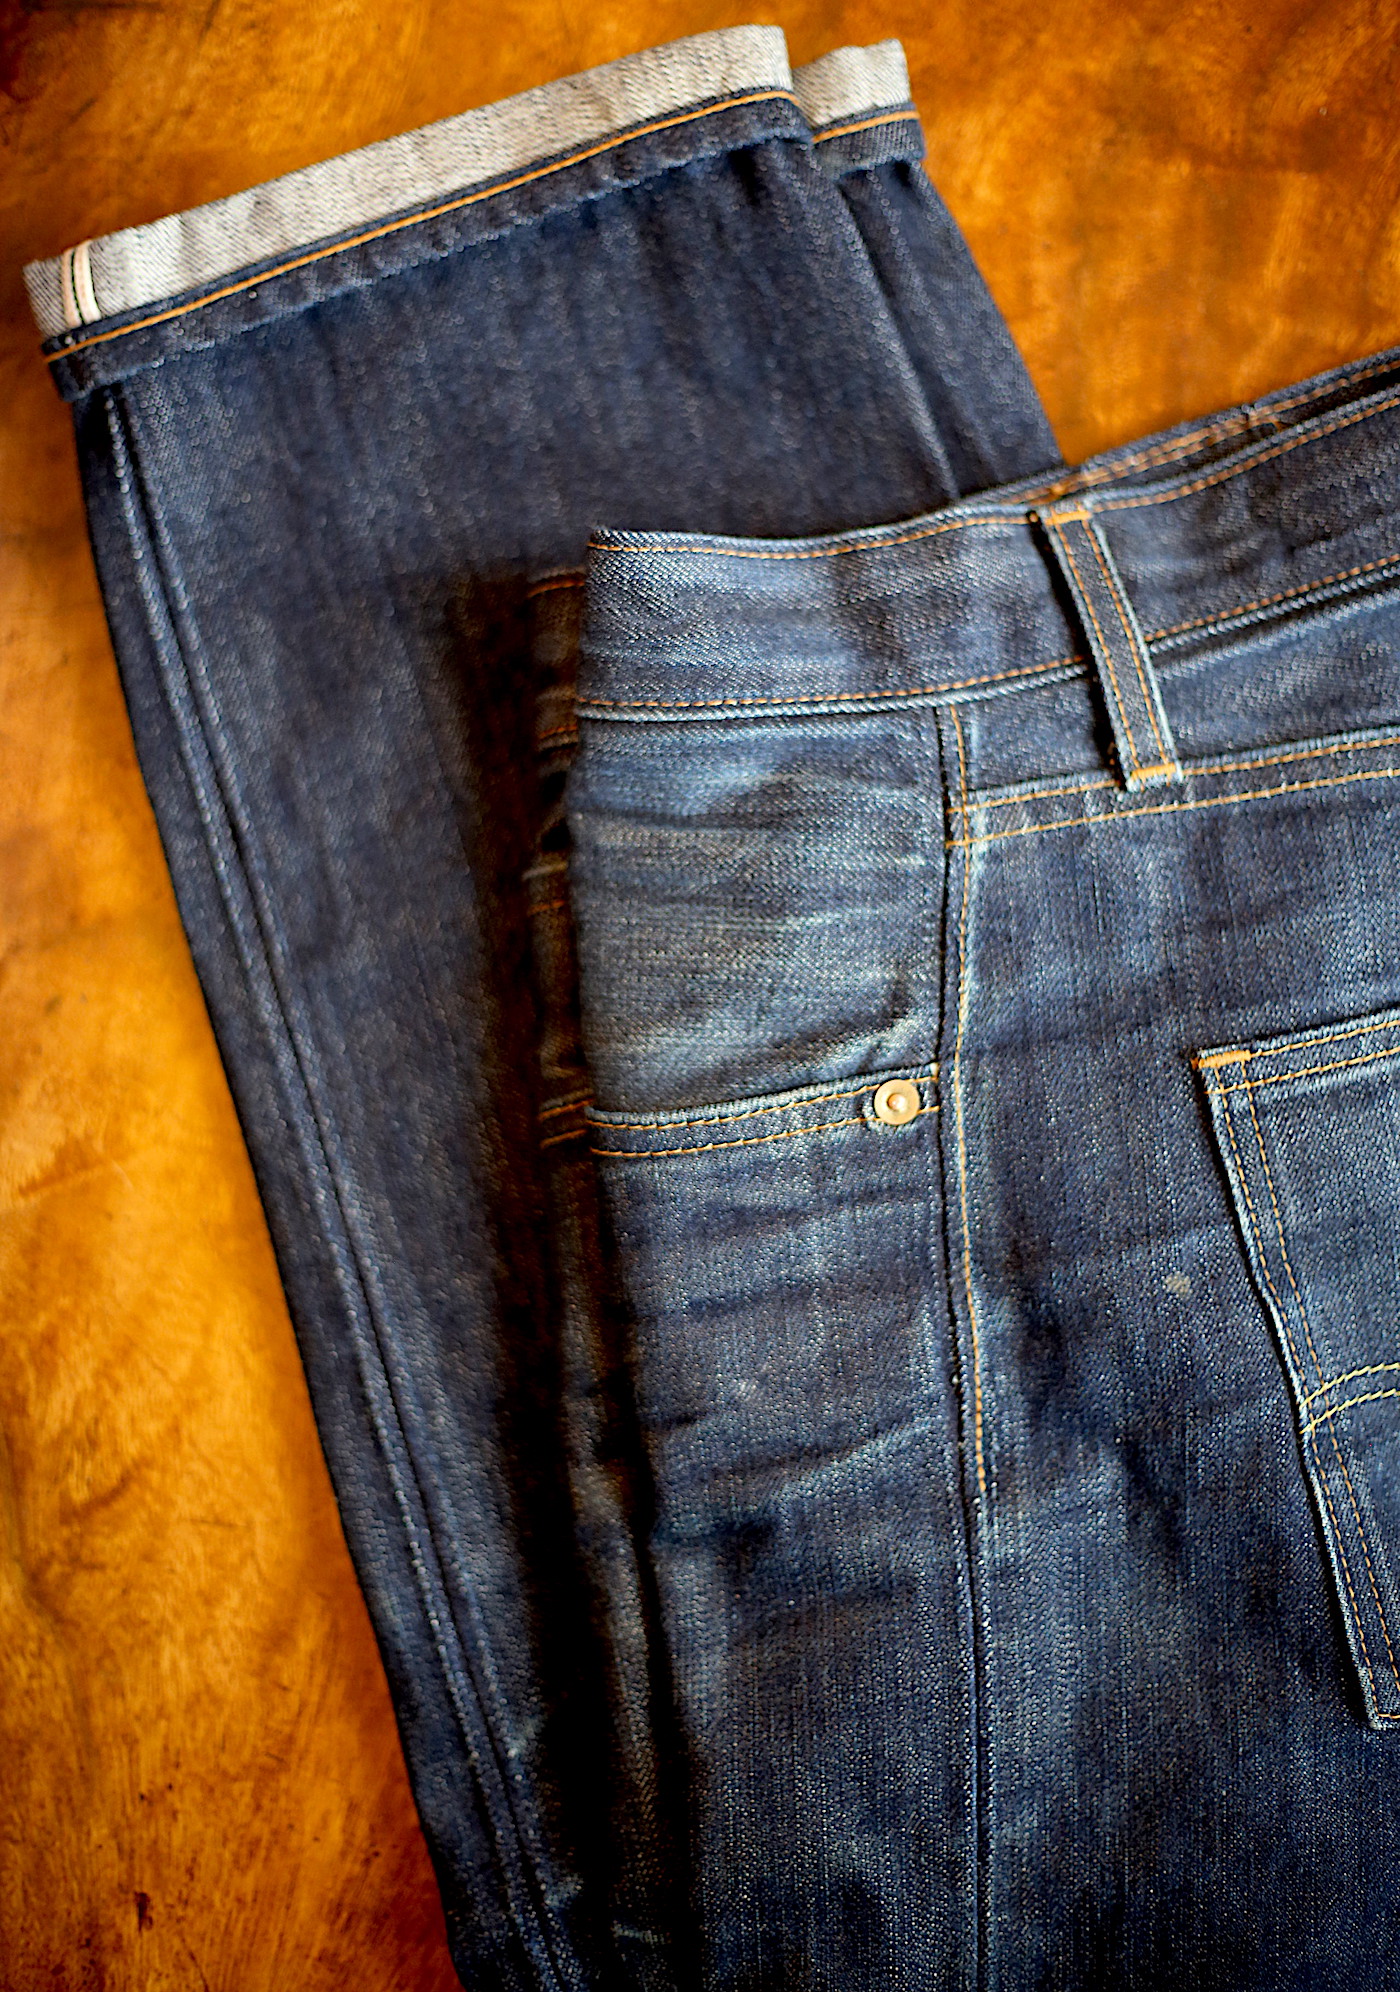 levi jeans alterations